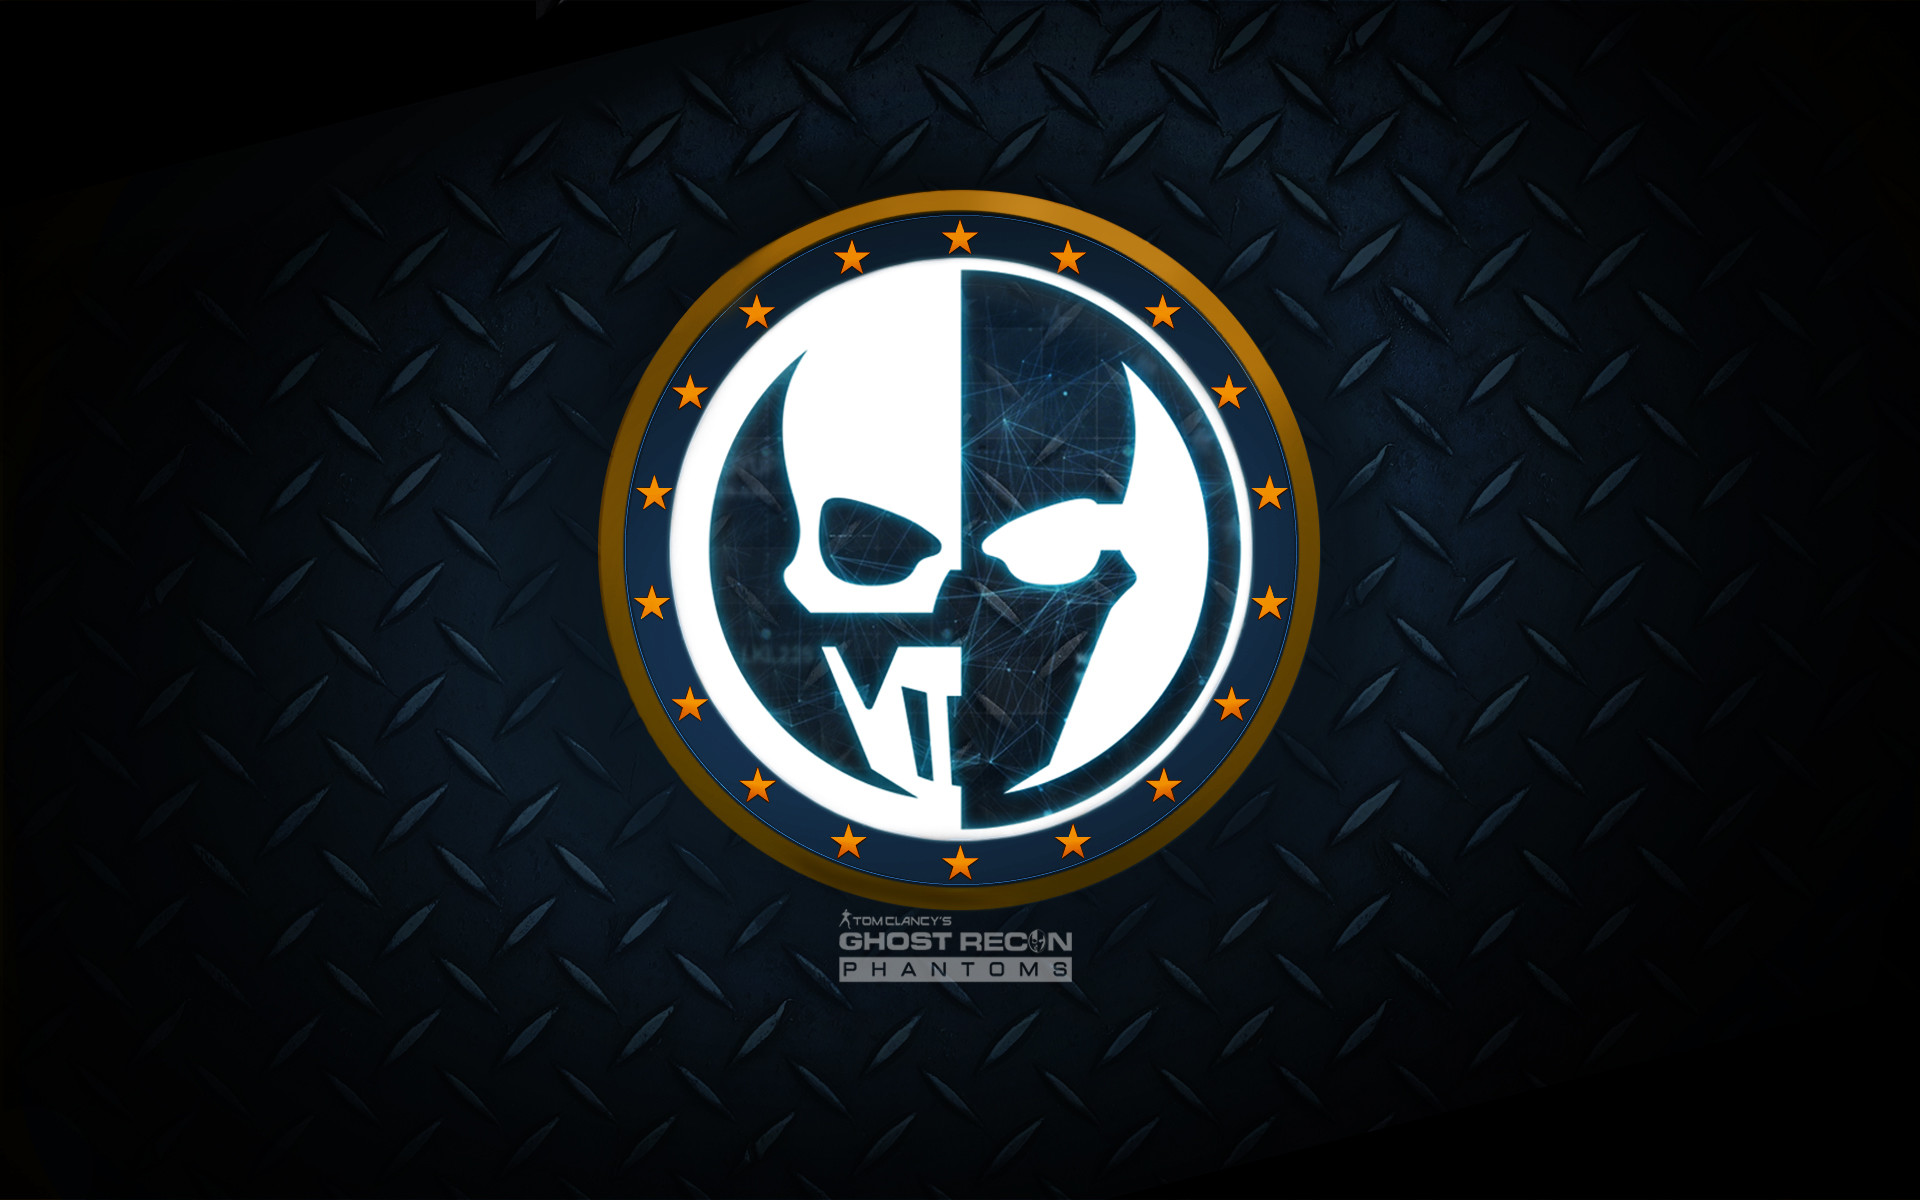 1920x1200 ... Tom Clancy's Ghost Recon Phantoms wallpaper. by spidermonkey23